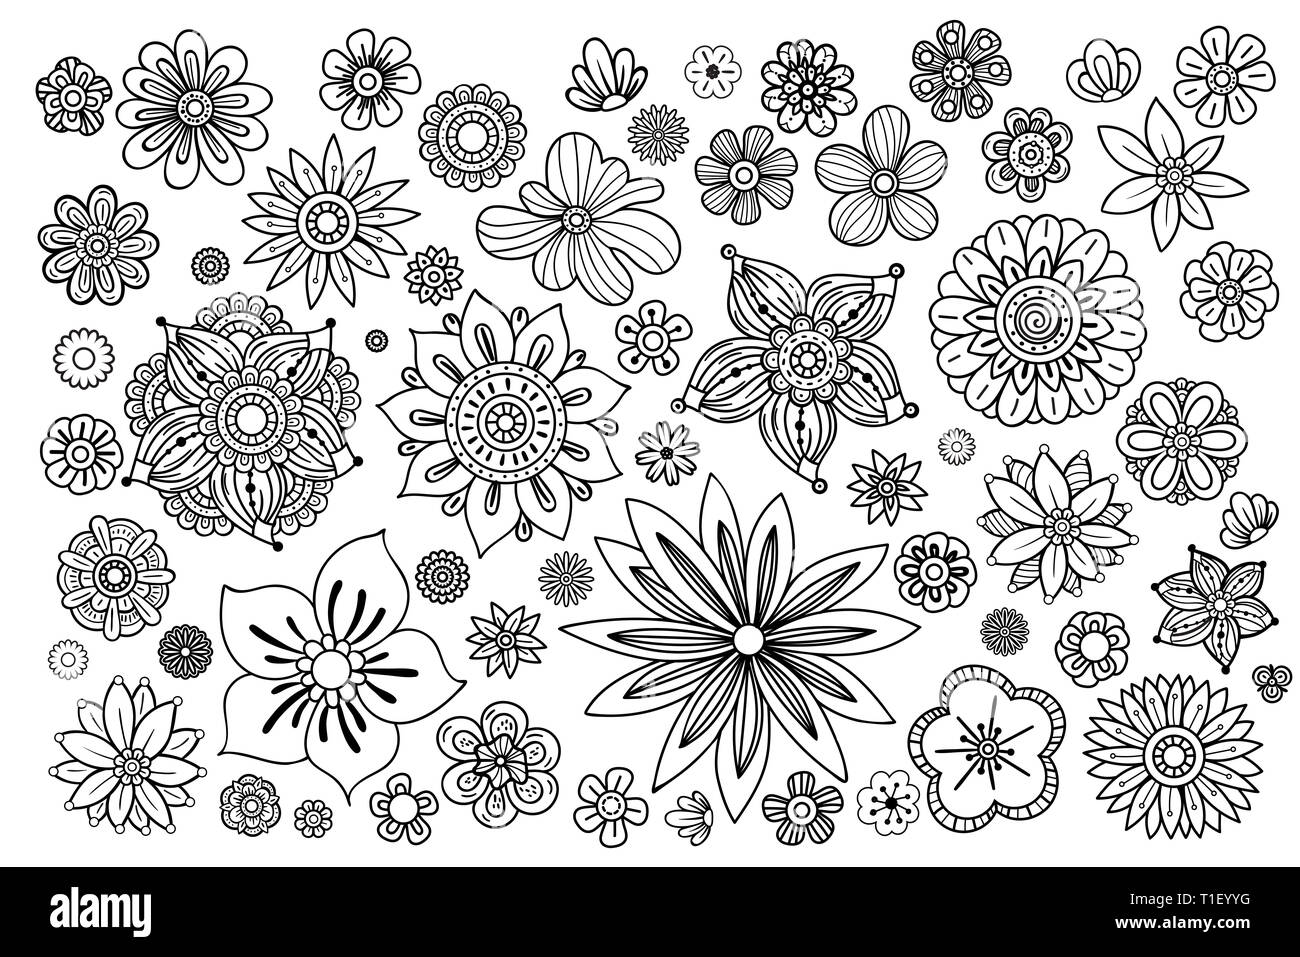 Hand drawn flowers collection. Floral design elements set. Black and white illustration in doodles style. Stock Photo